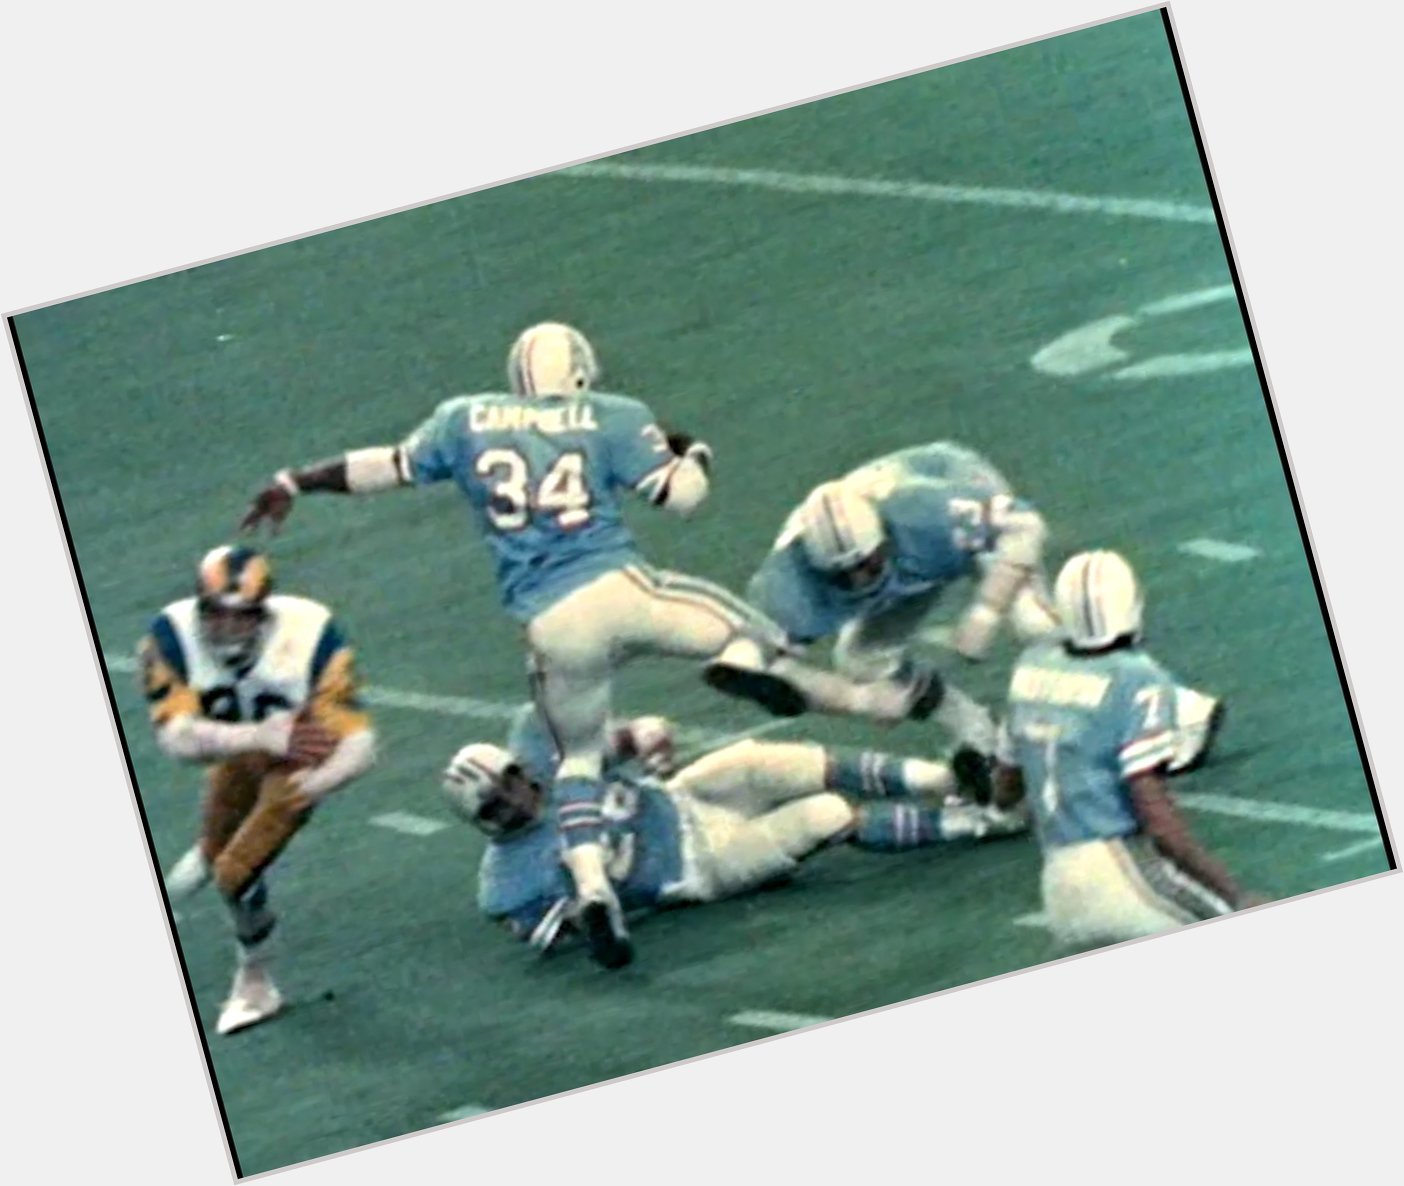 The Hall of Fame sends Happy Birthday wishes to Earl Campbell!

The famed former Houston Oiler turns 68 today. 